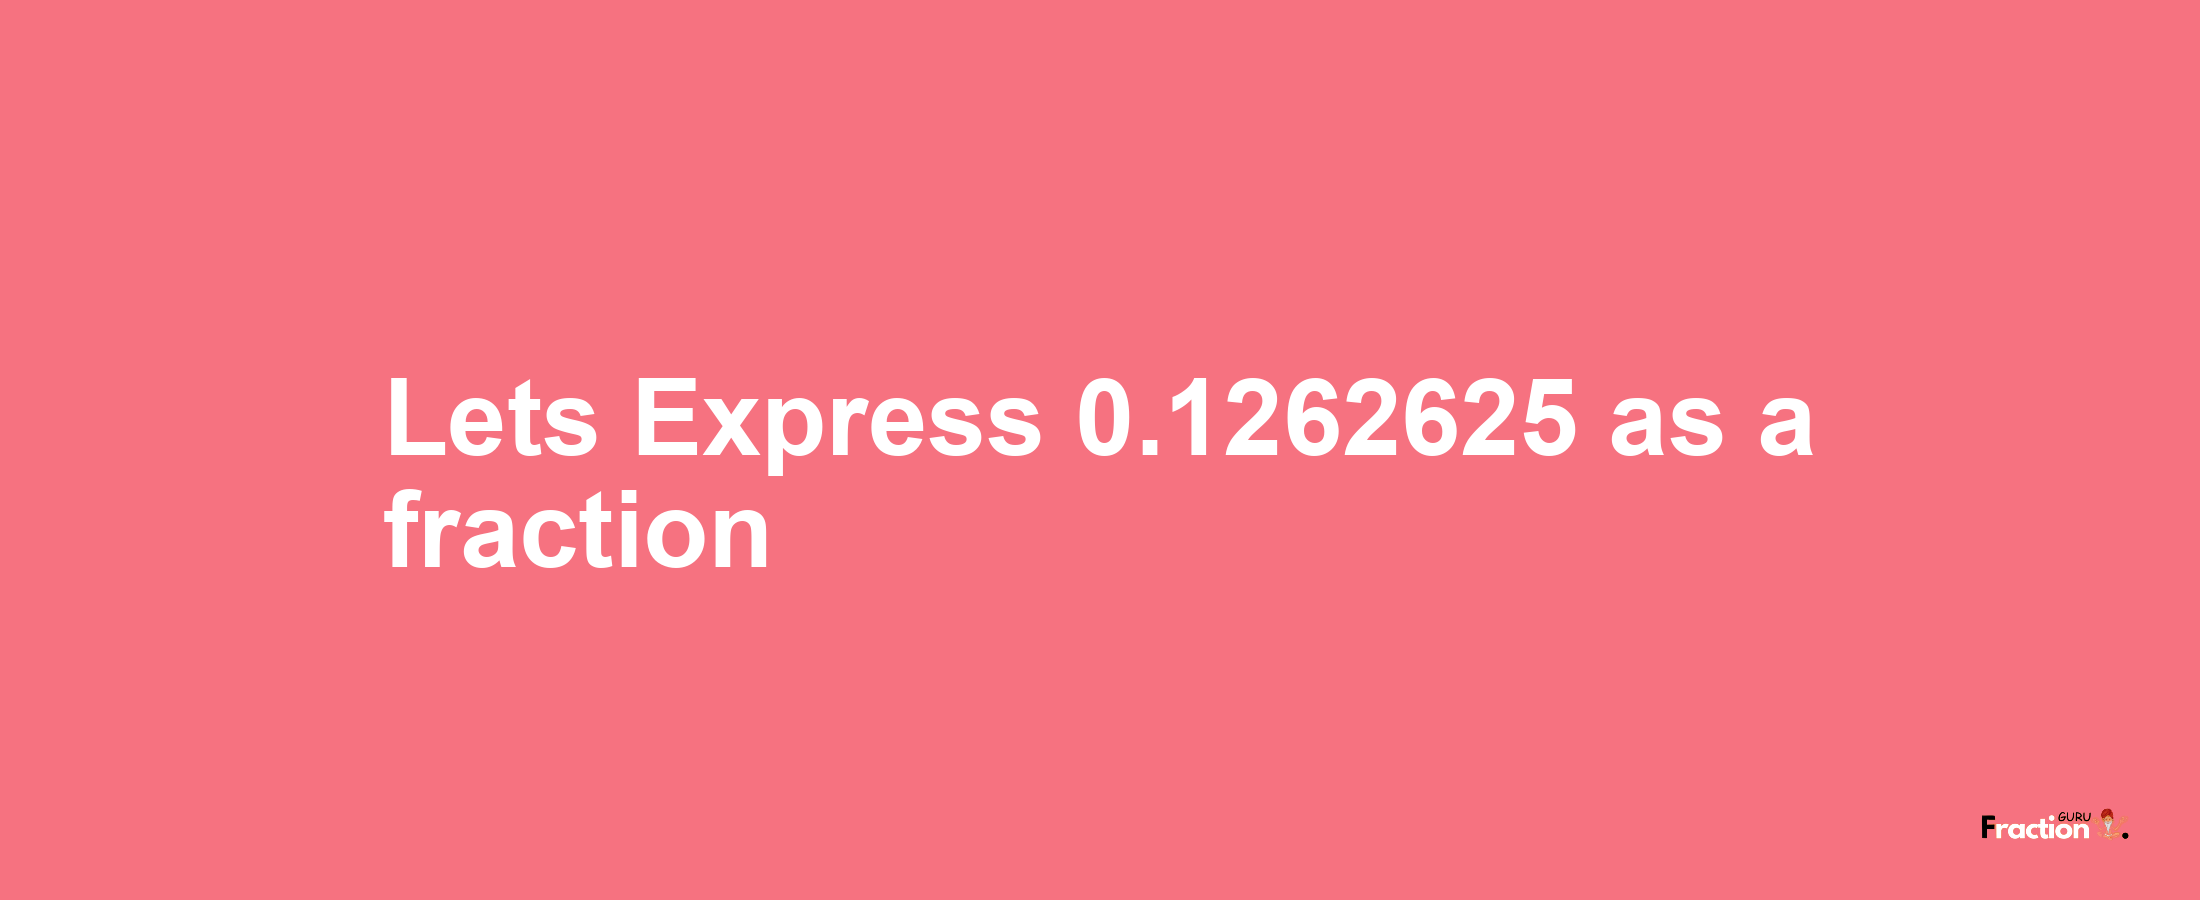 Lets Express 0.1262625 as afraction